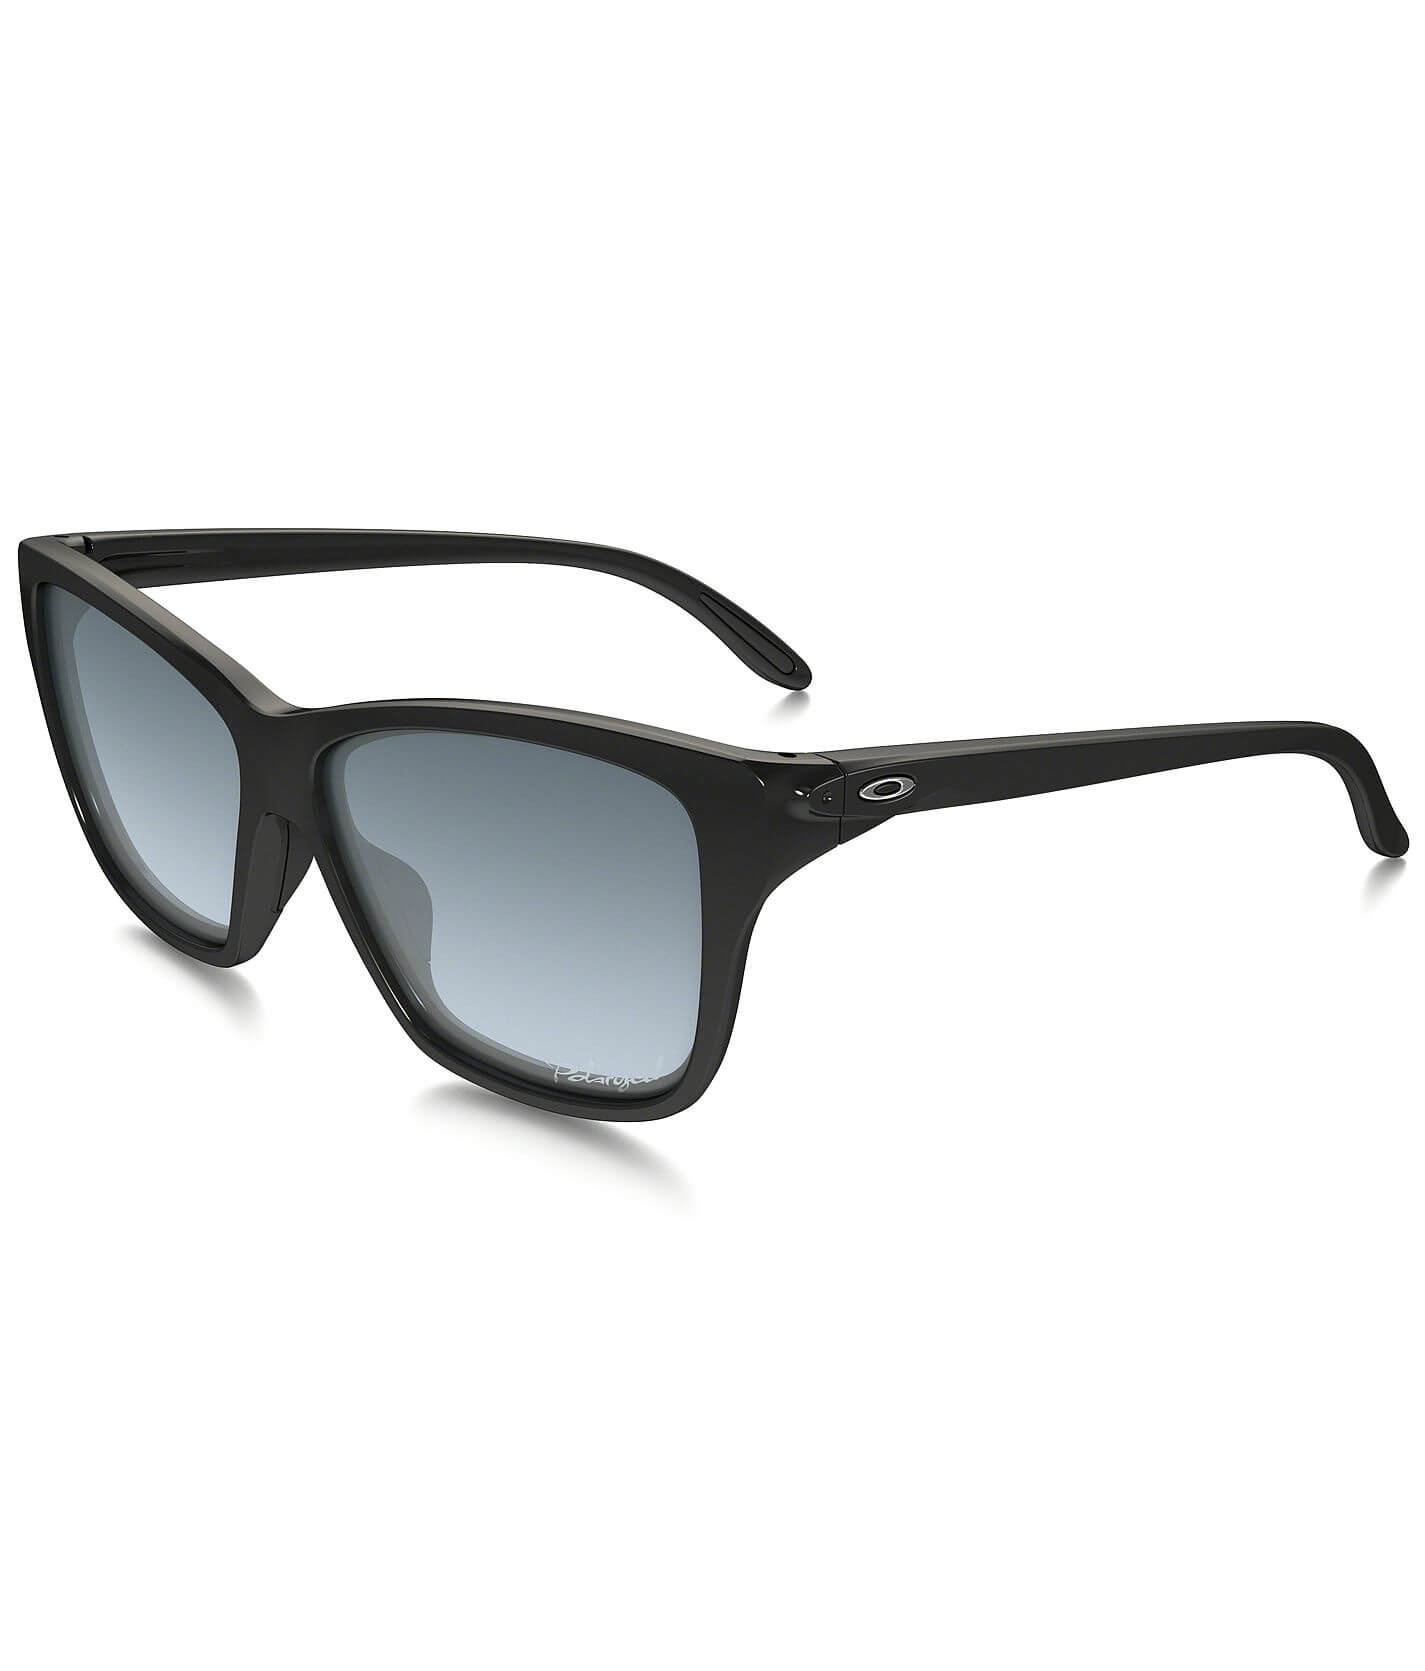 Oakley Hold On Sunglasses - Women's Sunglasses & Glasses in Polished Black  | Buckle